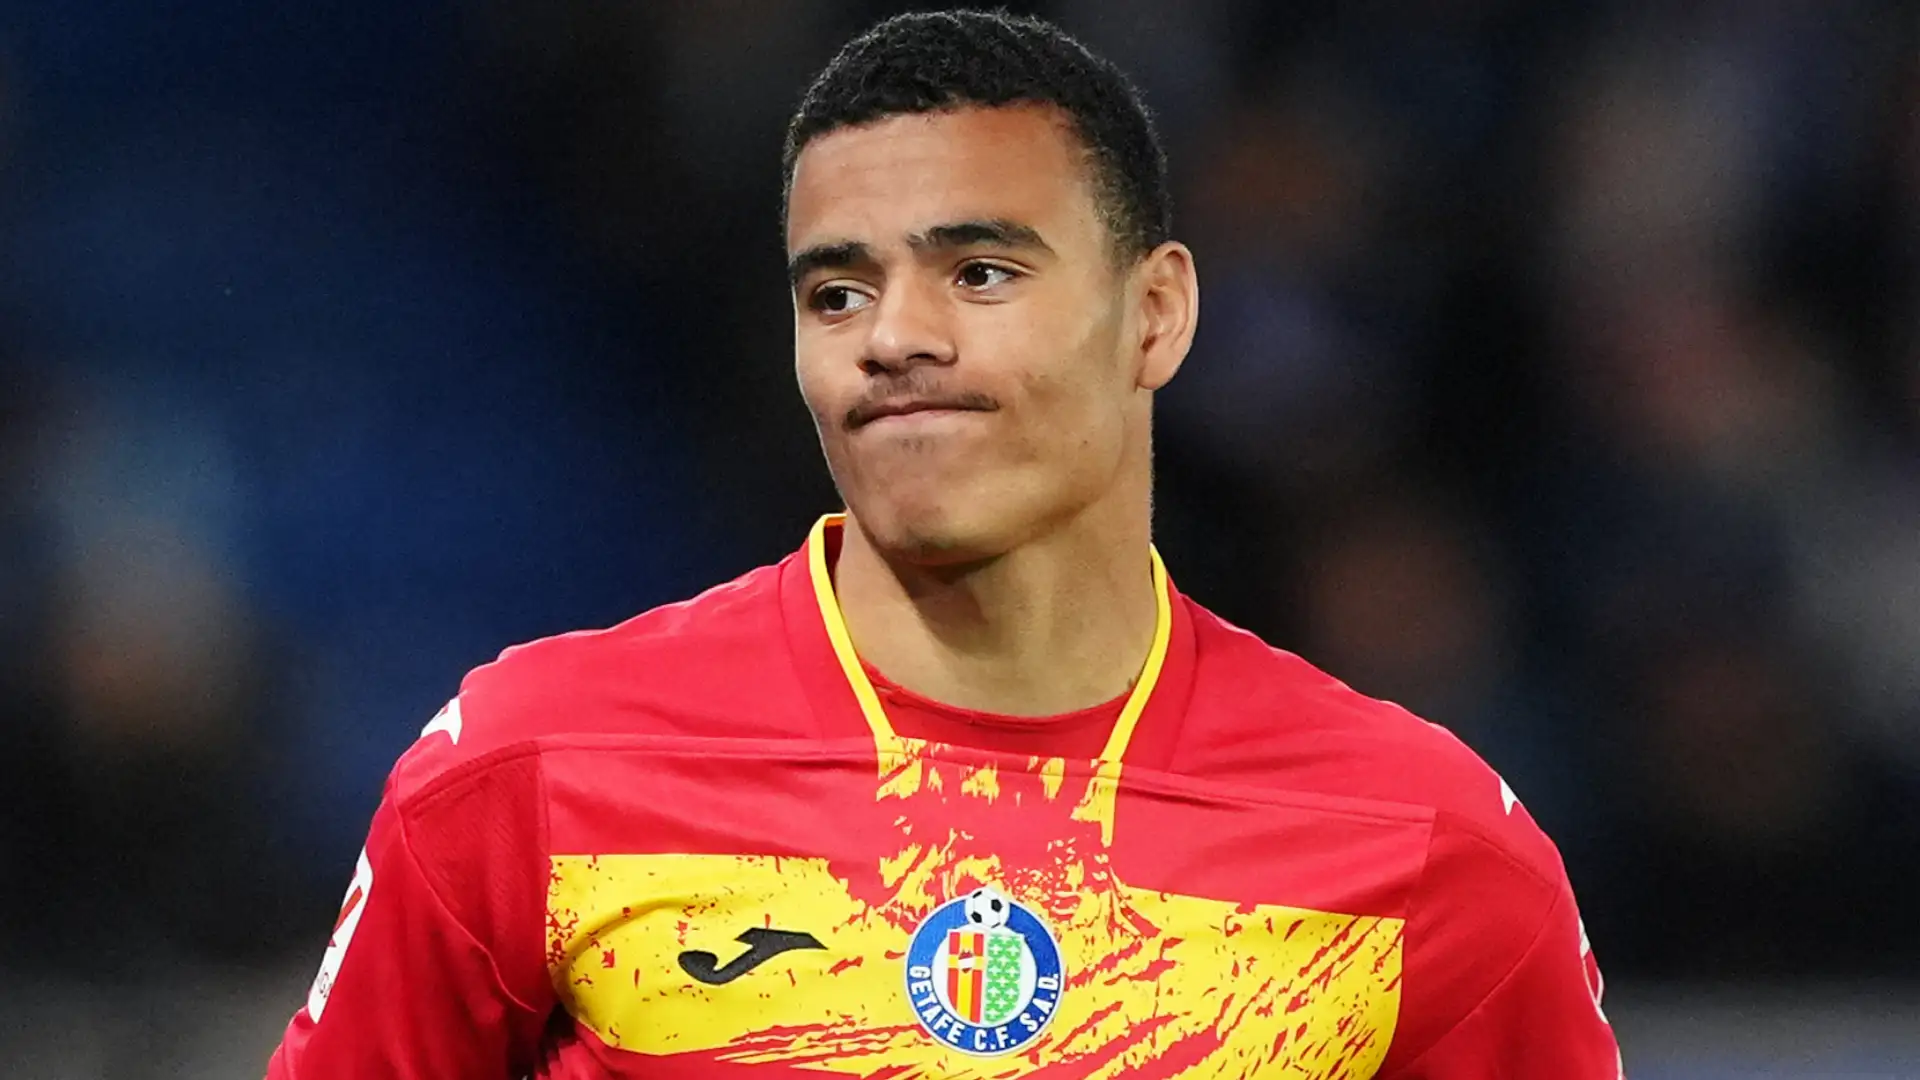 Man Utd want 'quick sale' of Mason Greenwood for £30m in order to bring in Bologna striker Joshua Zirkzee